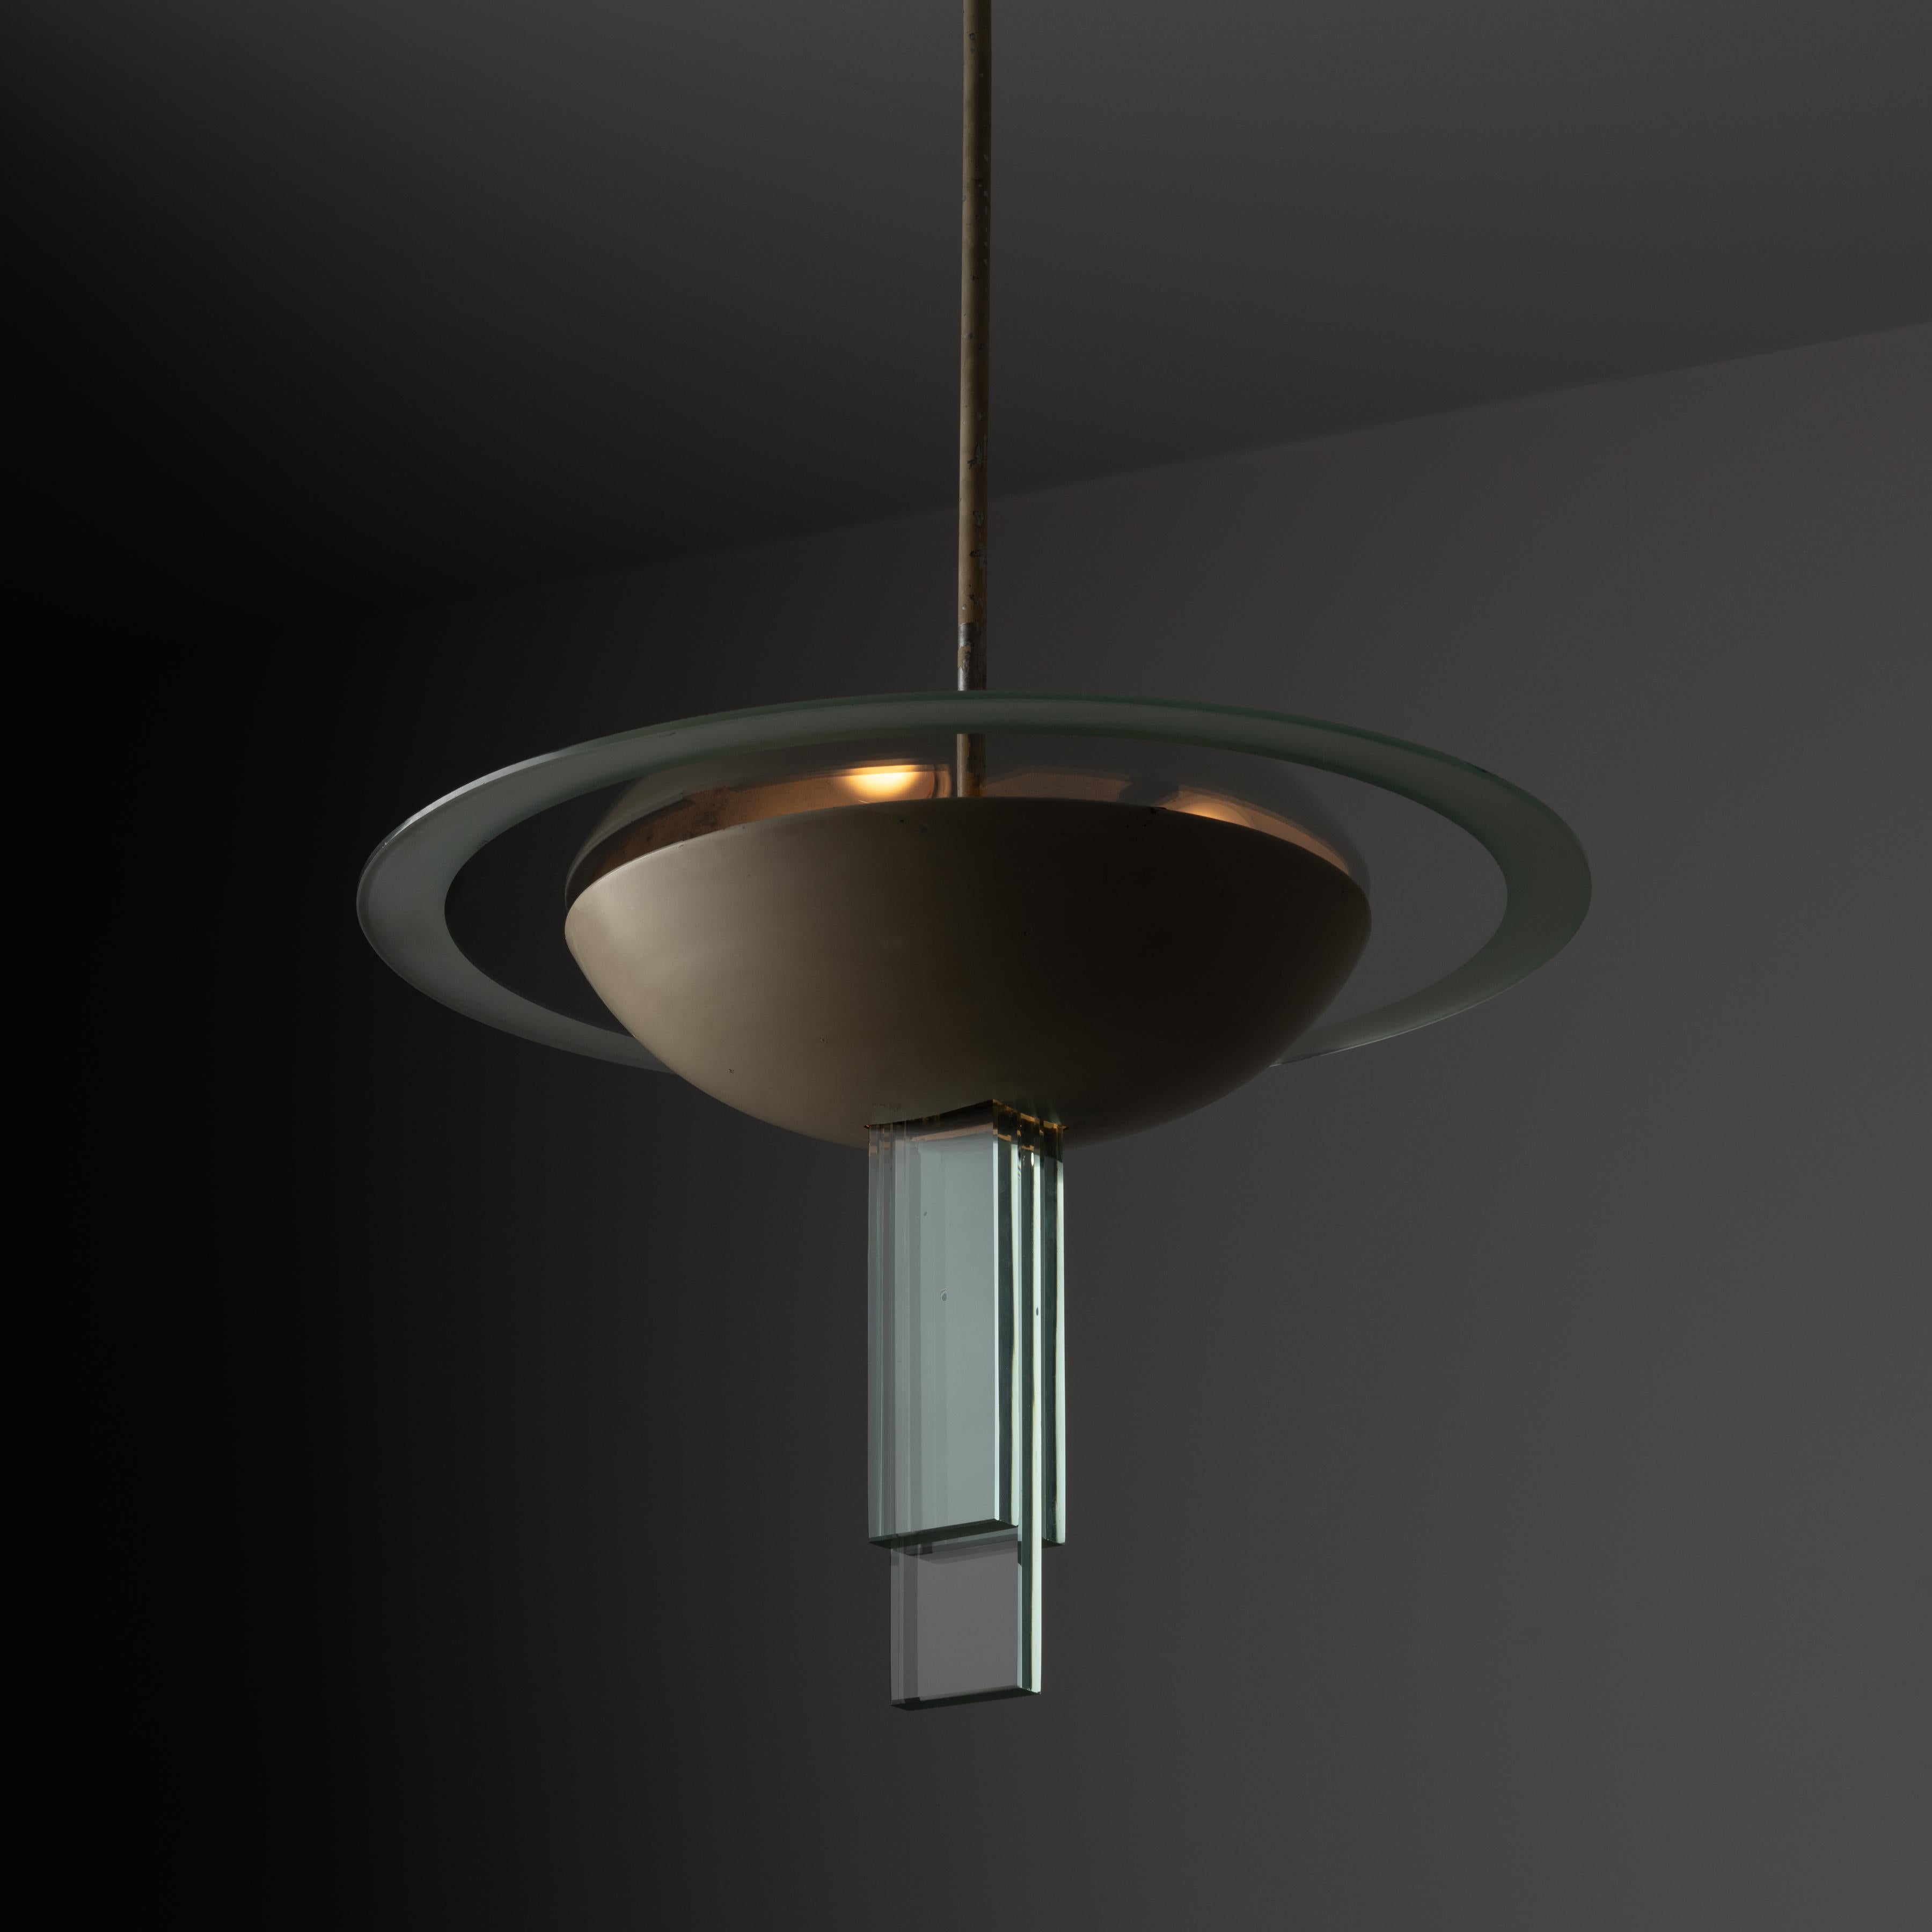 Ceiling Light by Pietro Chiesa for Fontana Arte. Designed and manufactured in Italy circa 1940. A timeless and sculptural ceiling light with signature Fontana Arte glass detailing and enameled brass dome shade. This piece holds three E27 bulbs,